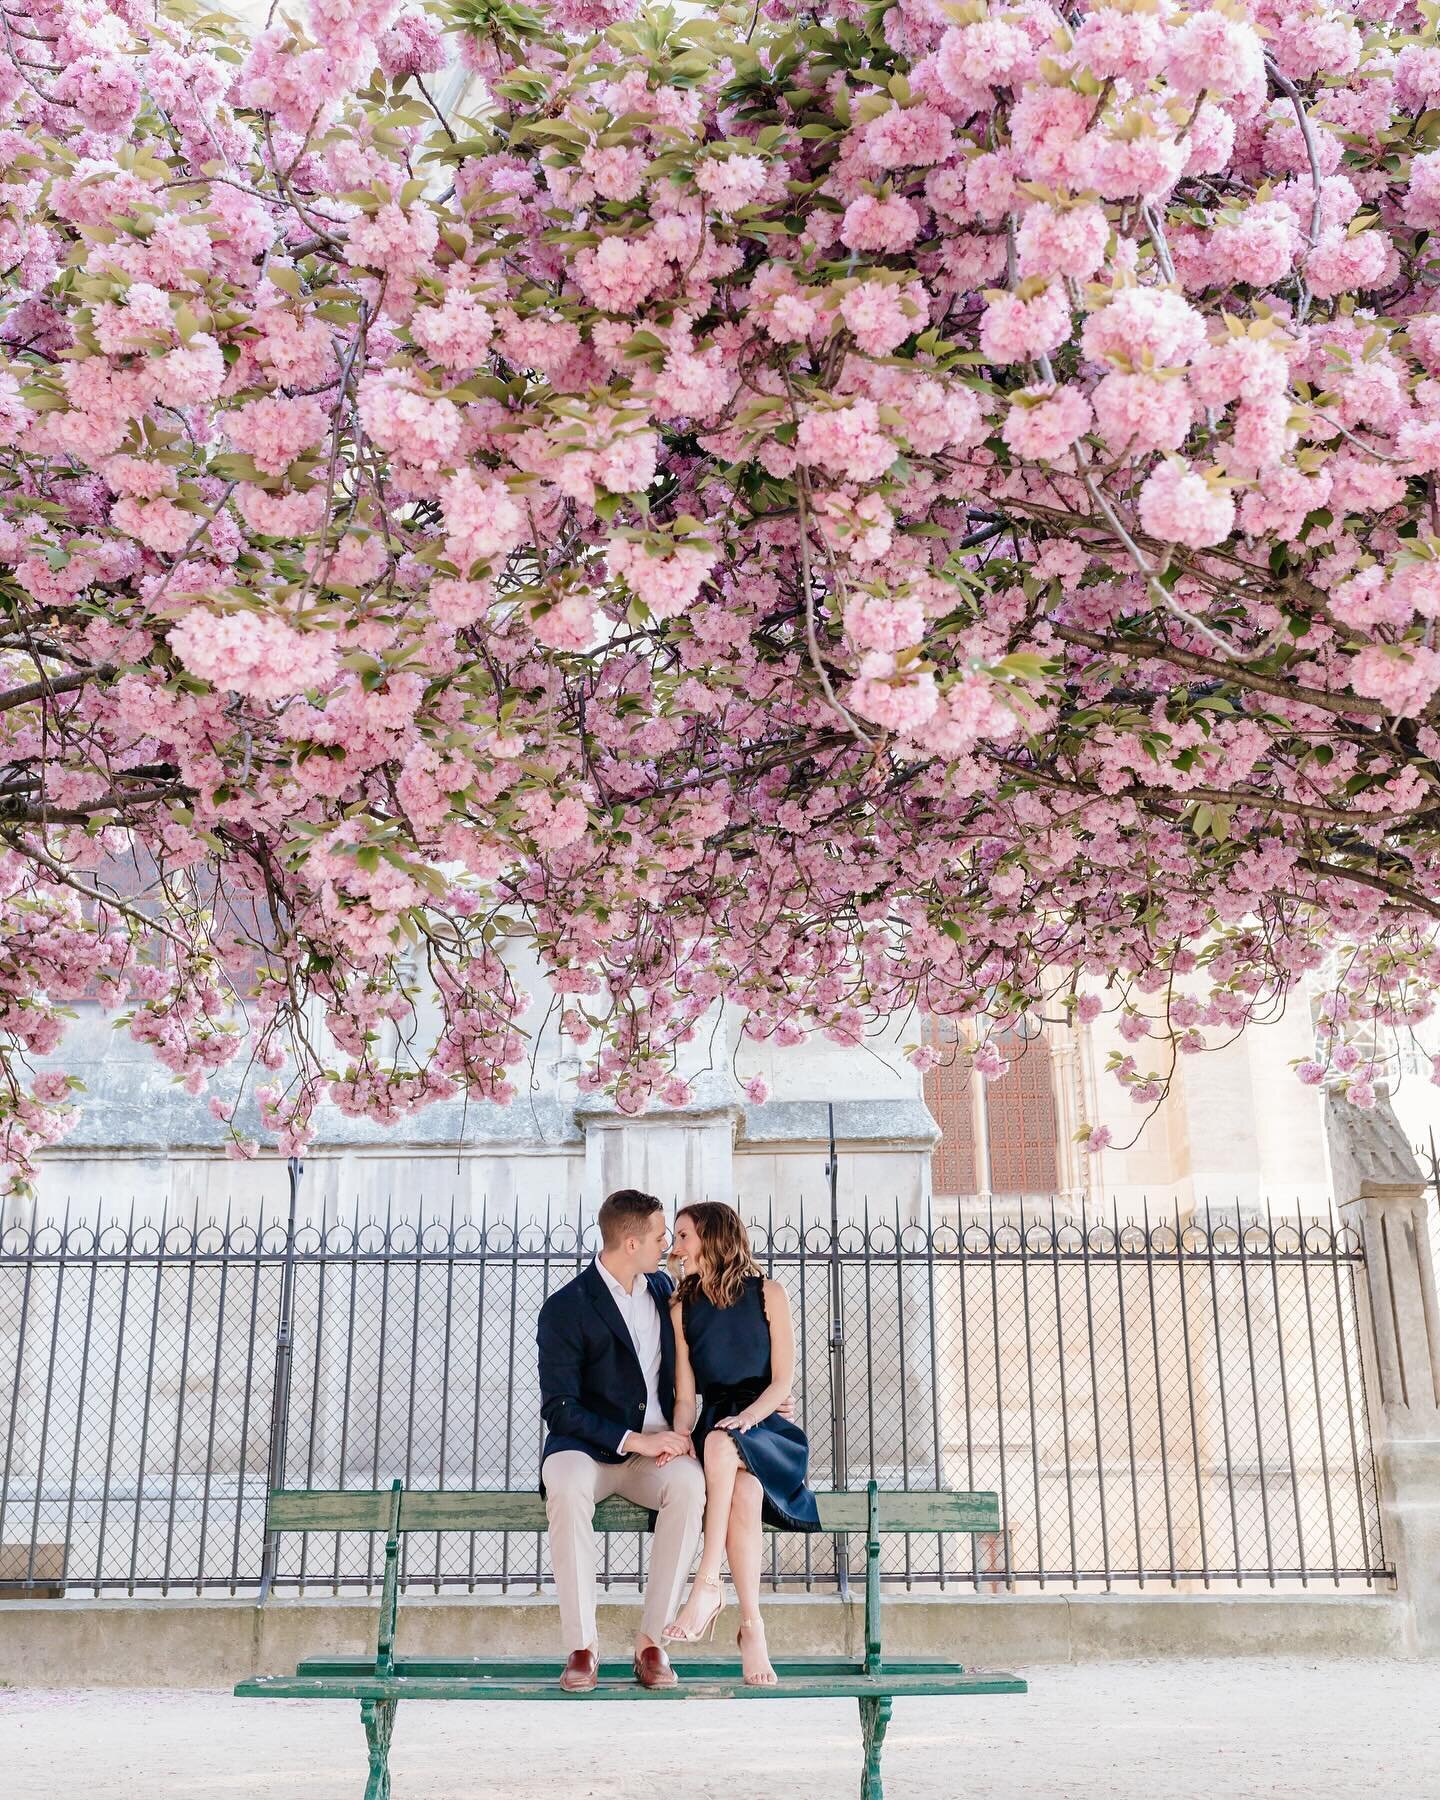 My favorite season is here 🌸🌷🌺 If you haven&rsquo;t booked your spring bloom session in Paris for April, the time is now 🌞 
.
.
#iheartparisfr #parisphotographer #photographerinparis #parisportraits #springinparis